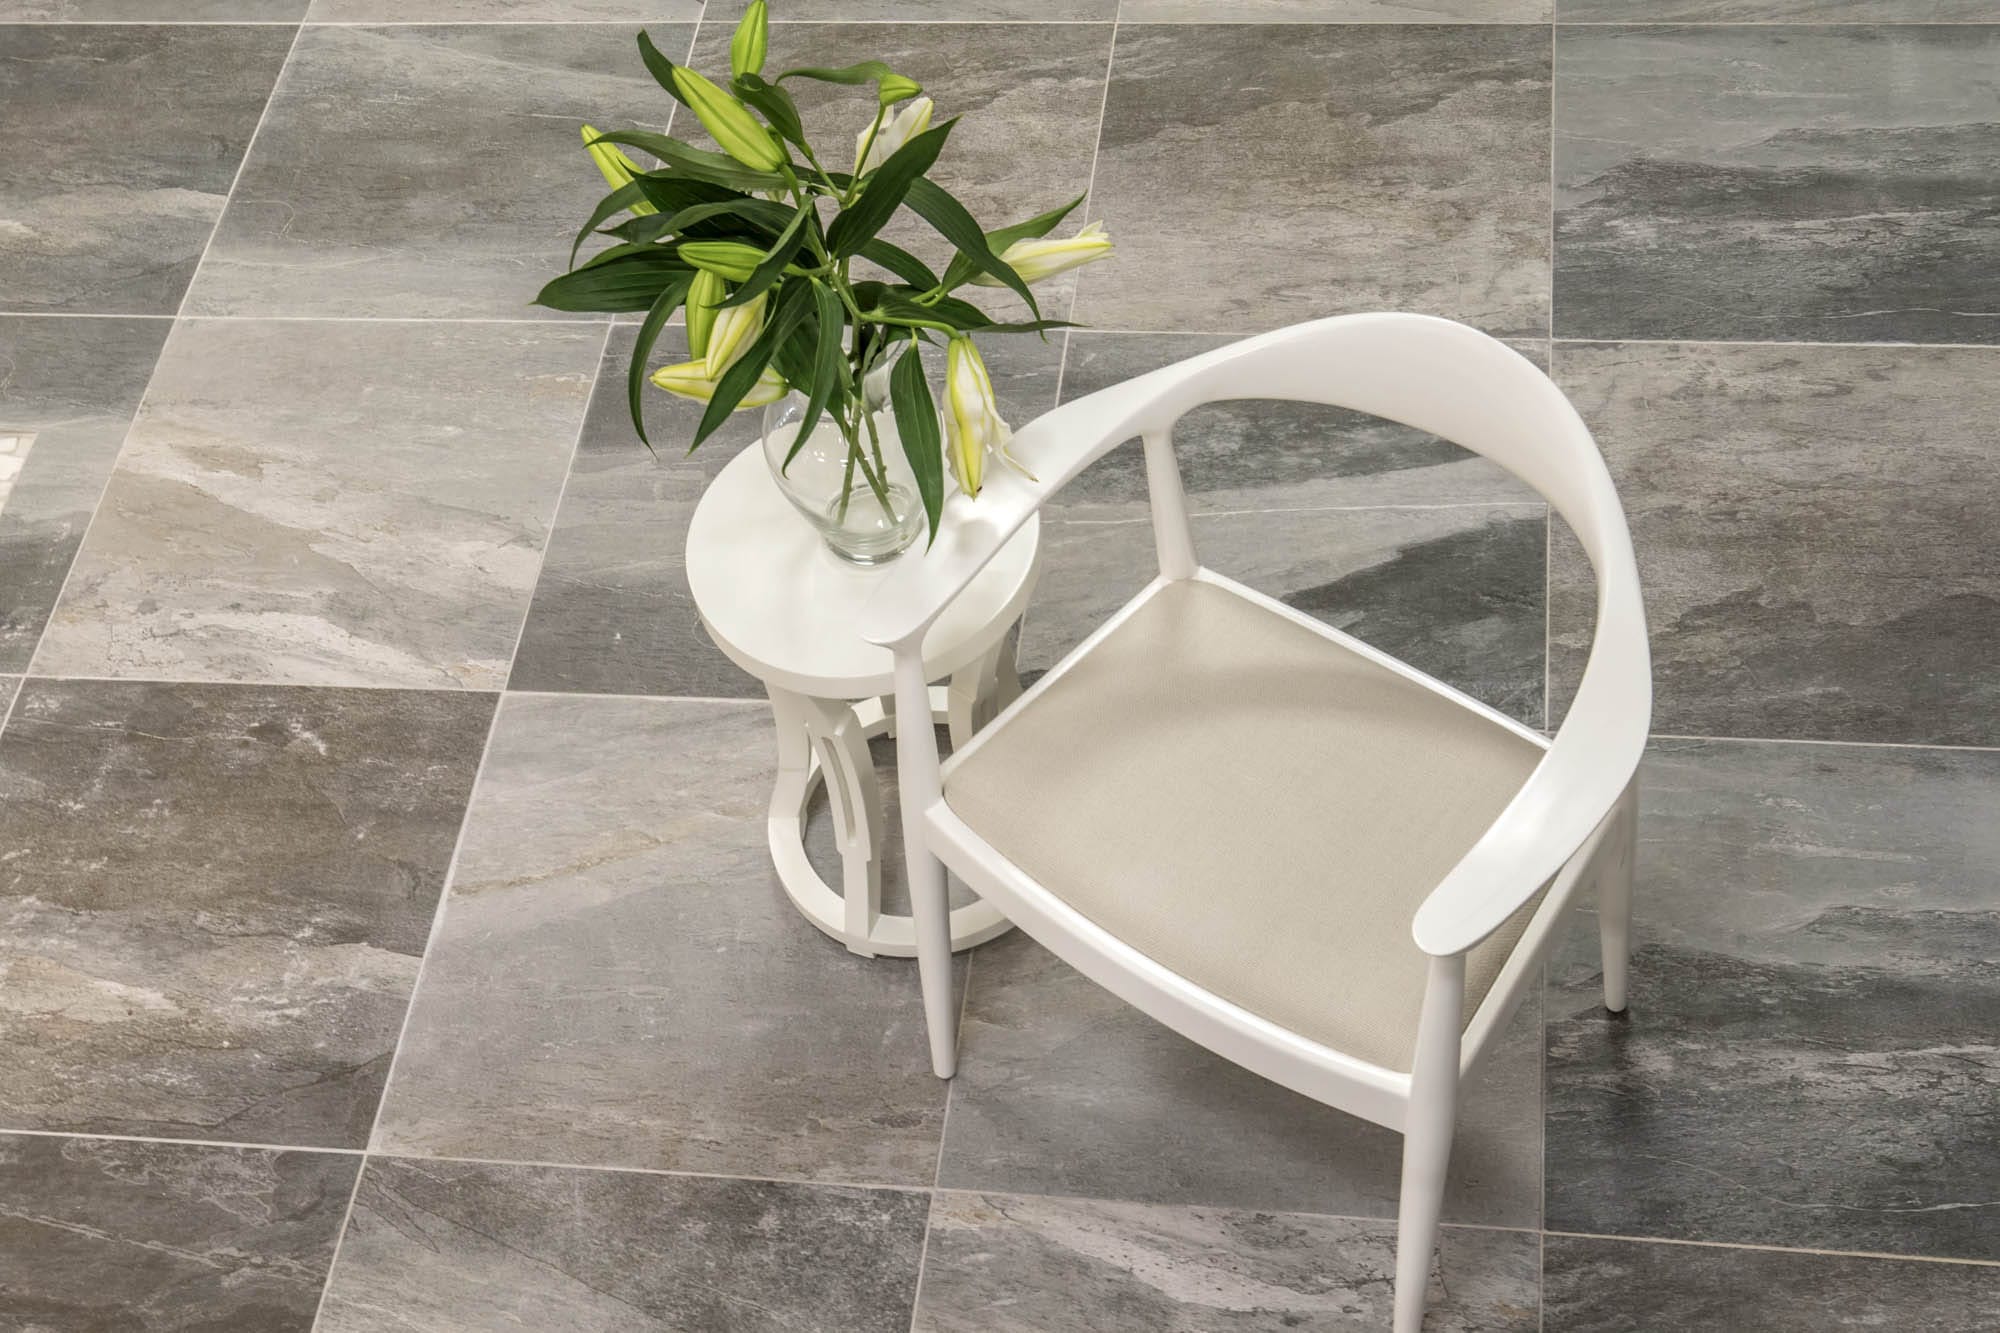 How To Keep Your Tile Surfaces Bright and Shiny?